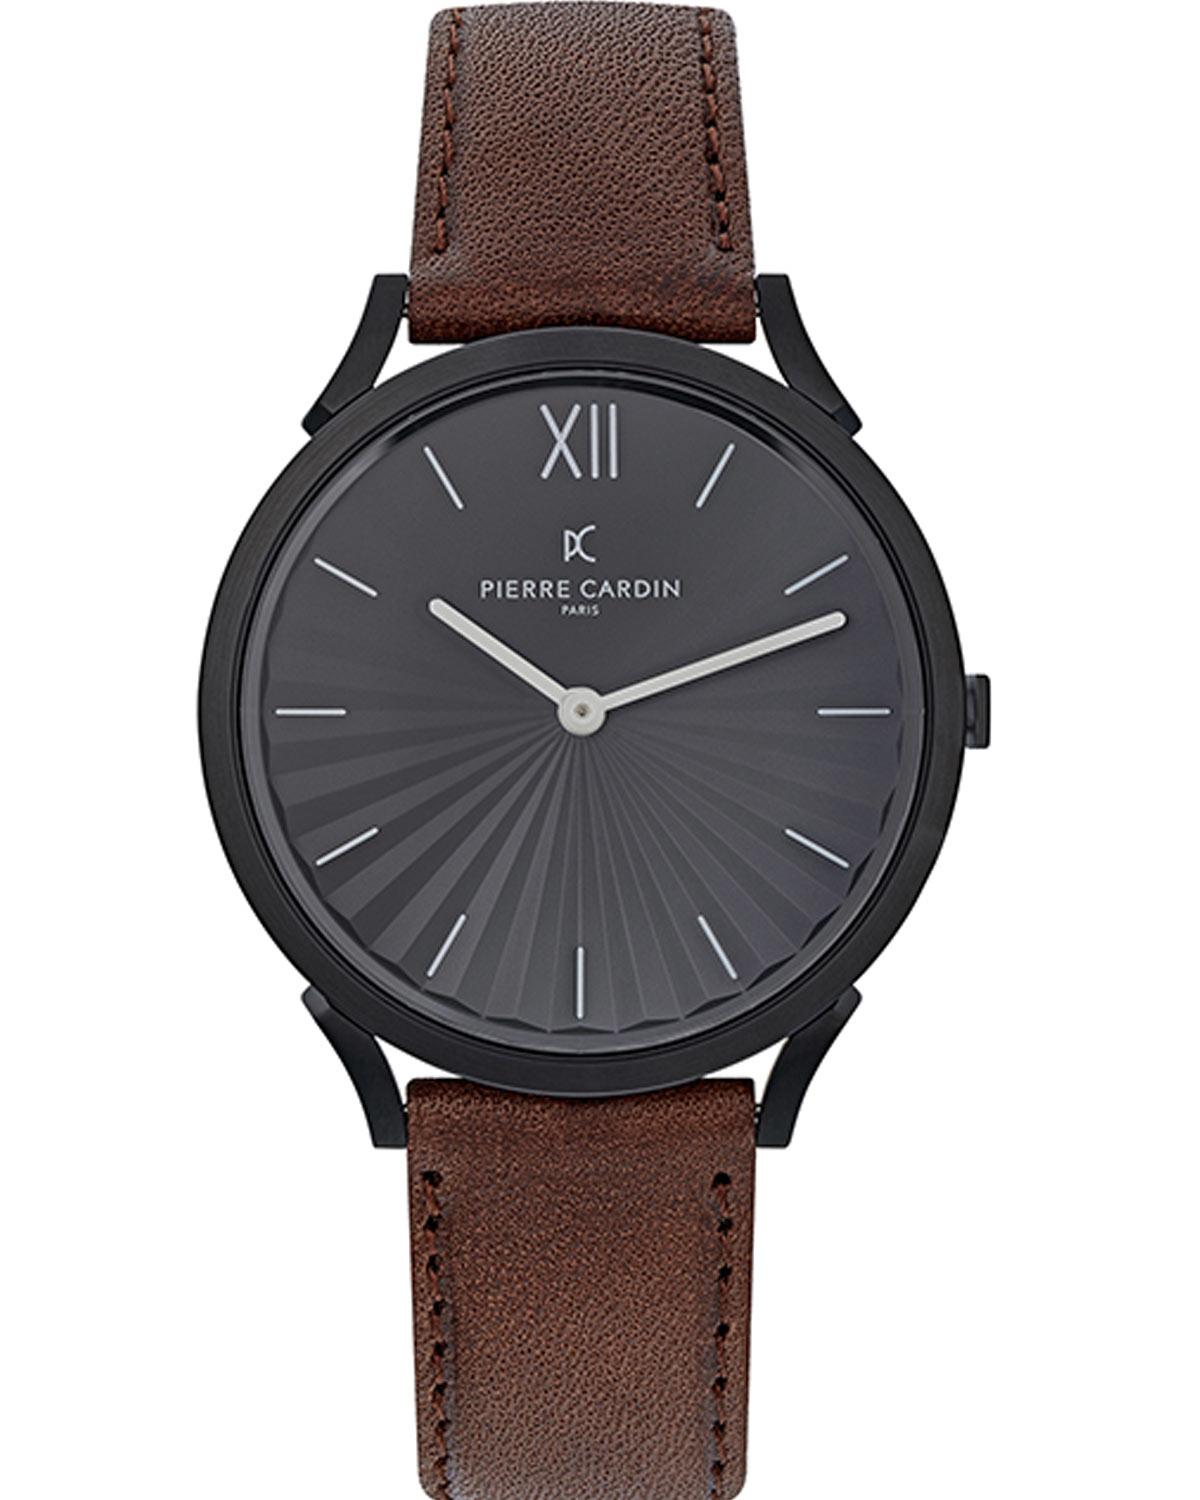 PIERRE CARDIN Pigalle Mens - CPI.2007, Black case with Brown Leather Strap 23483